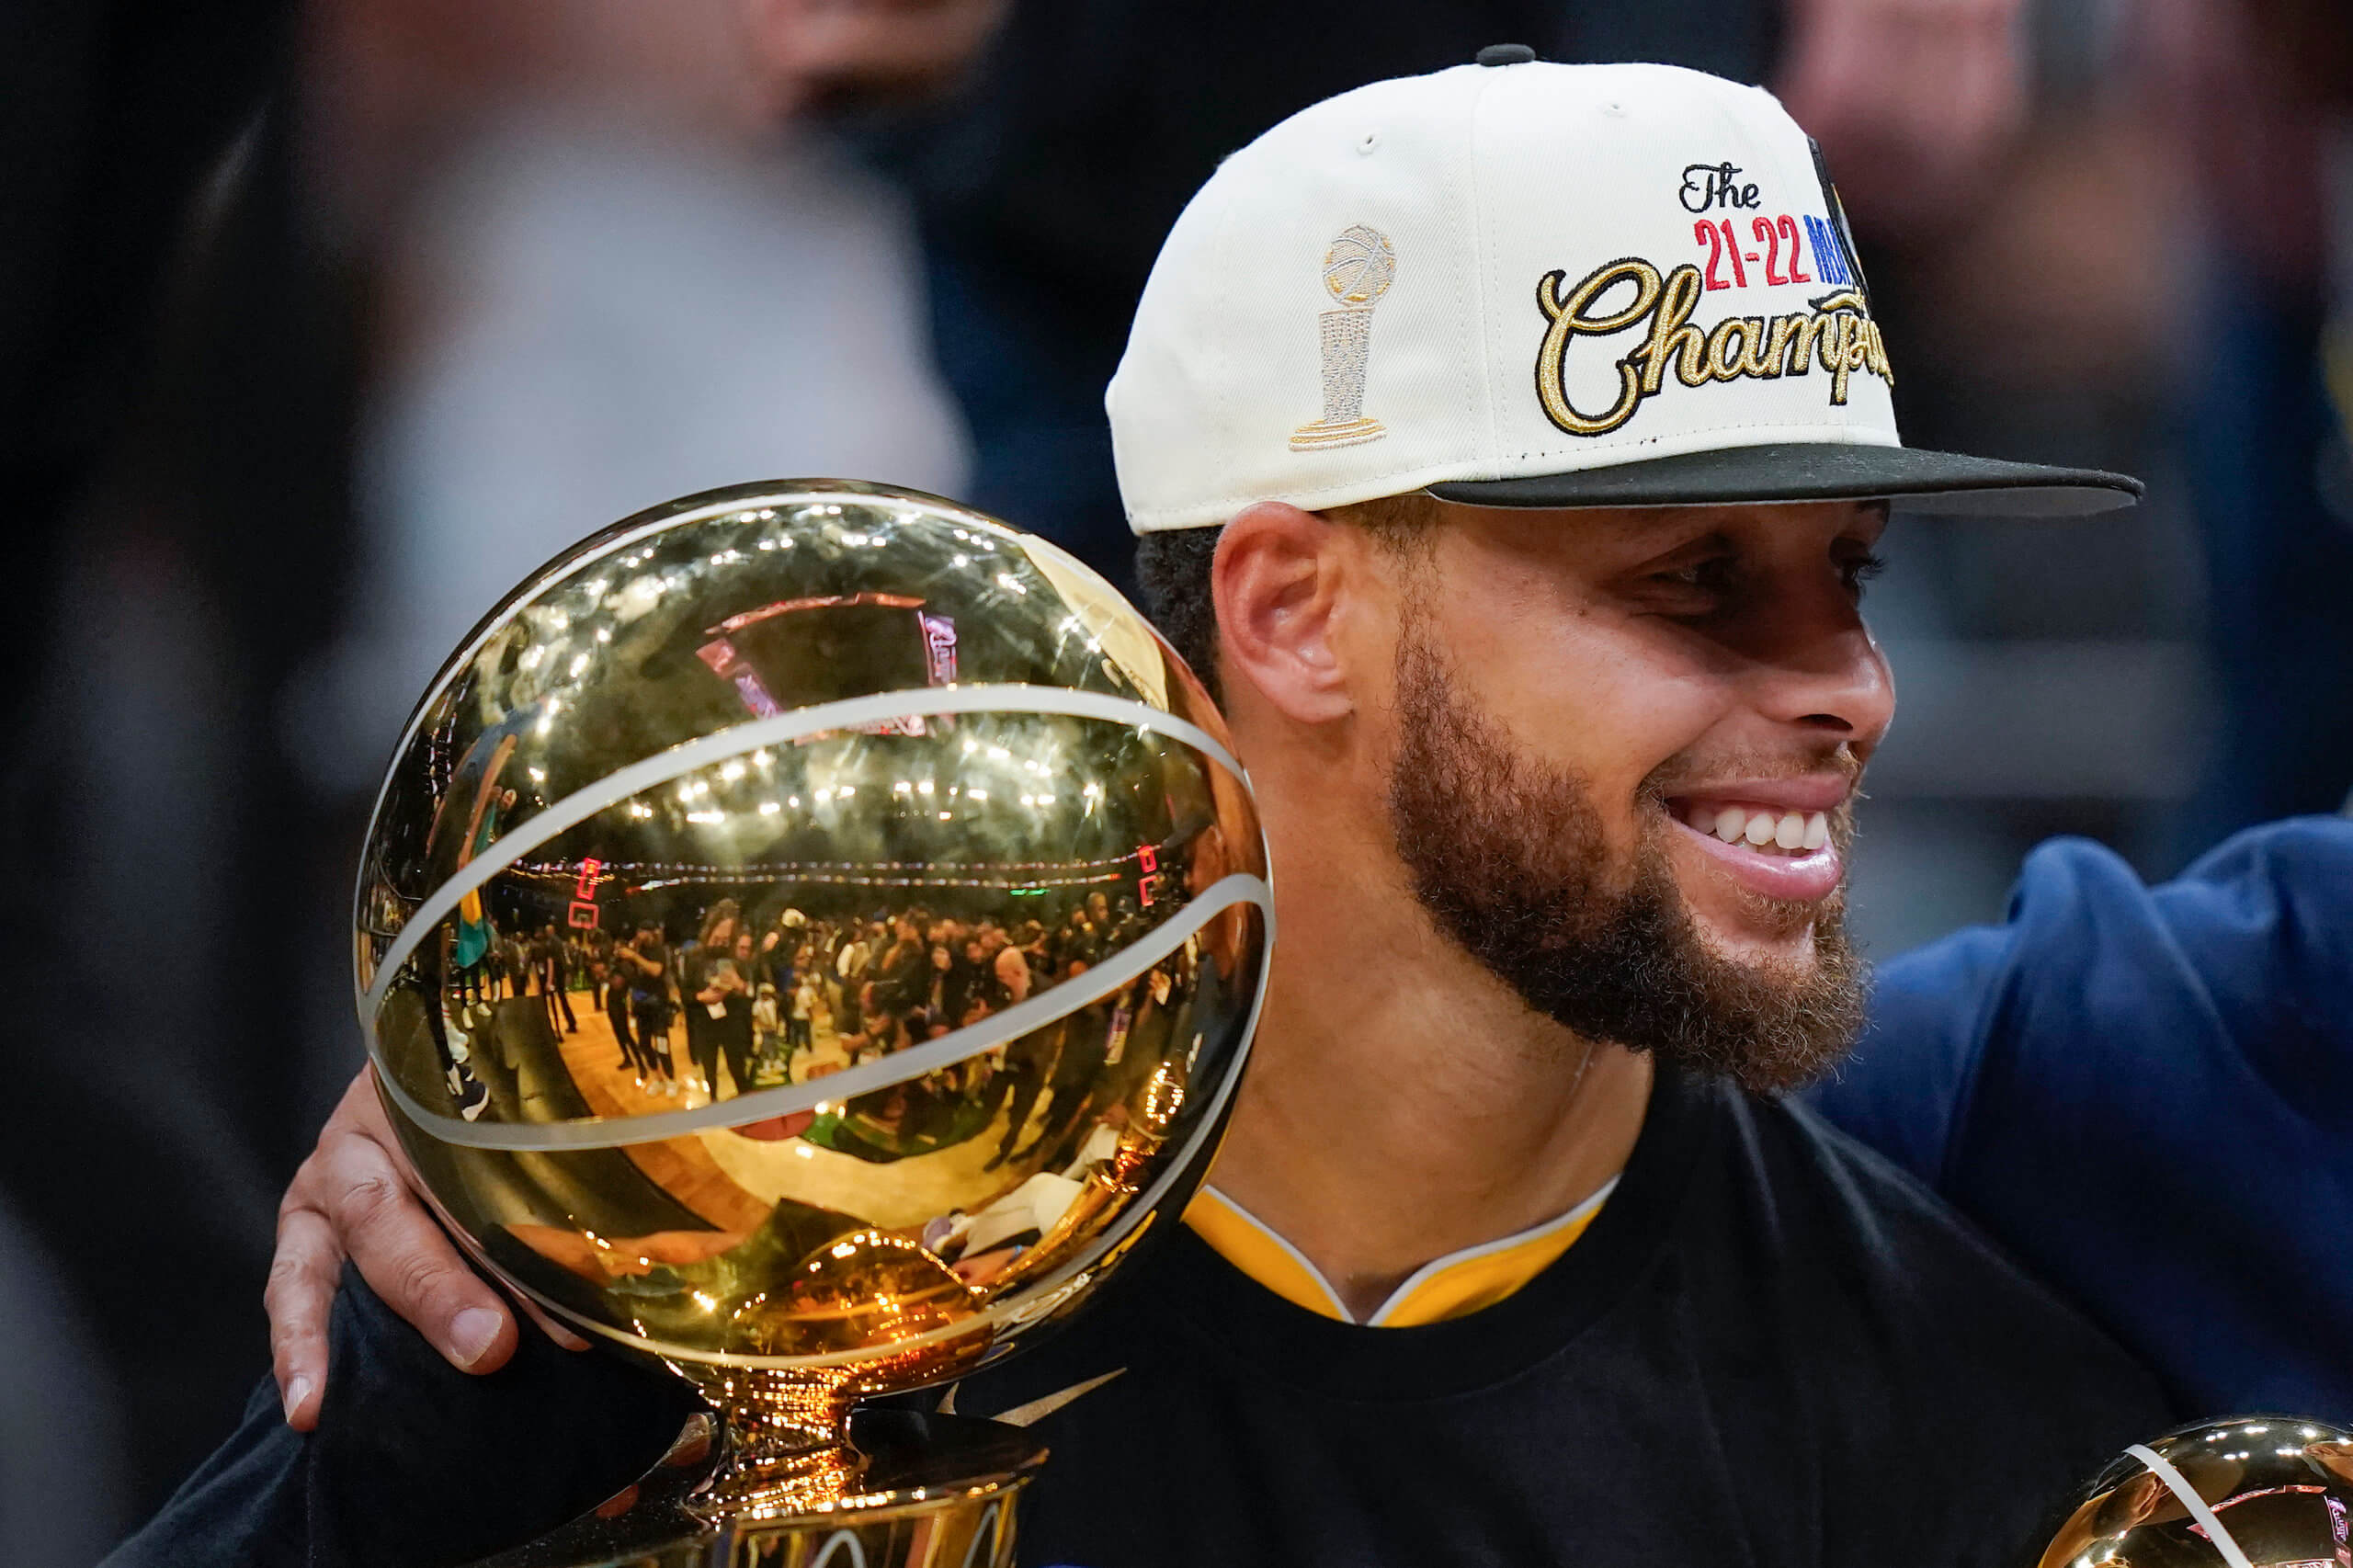 Magic Johnson: Steph Curry Should Be 2022 NBA Finals MVP Whether